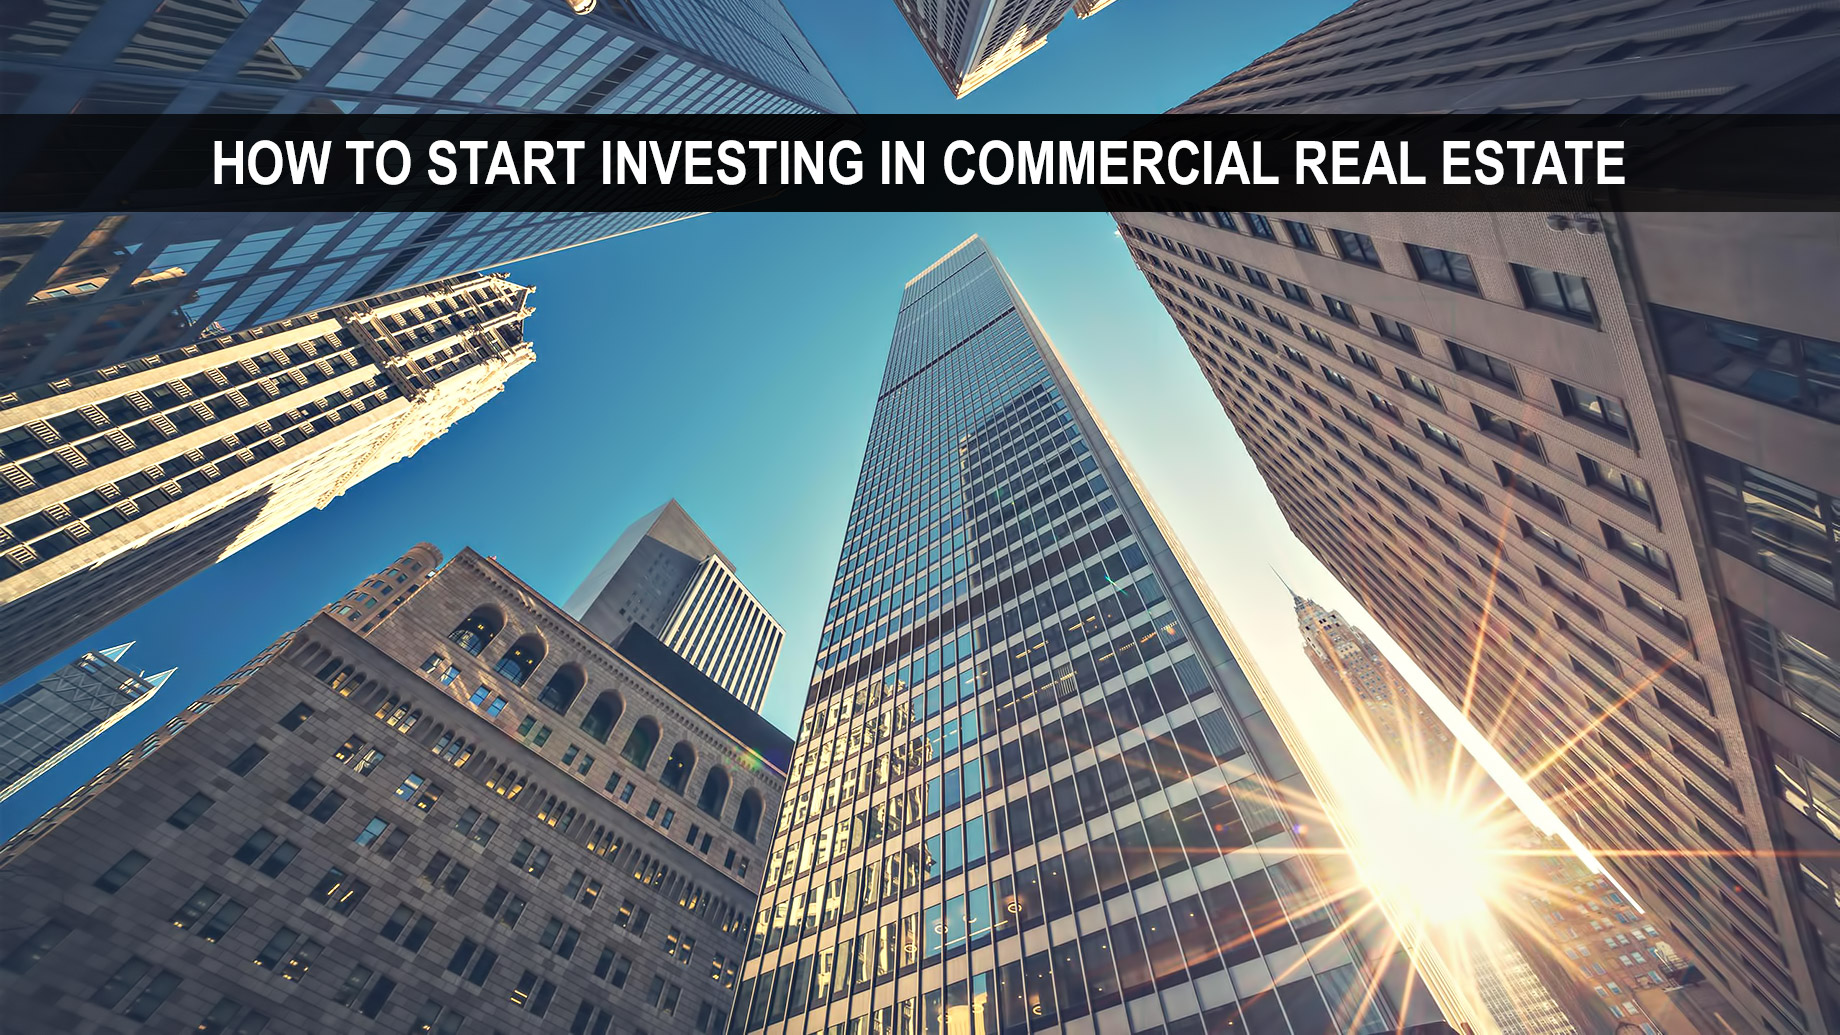 Commercial Real Estate Investing Companies: Top Picks for 2023